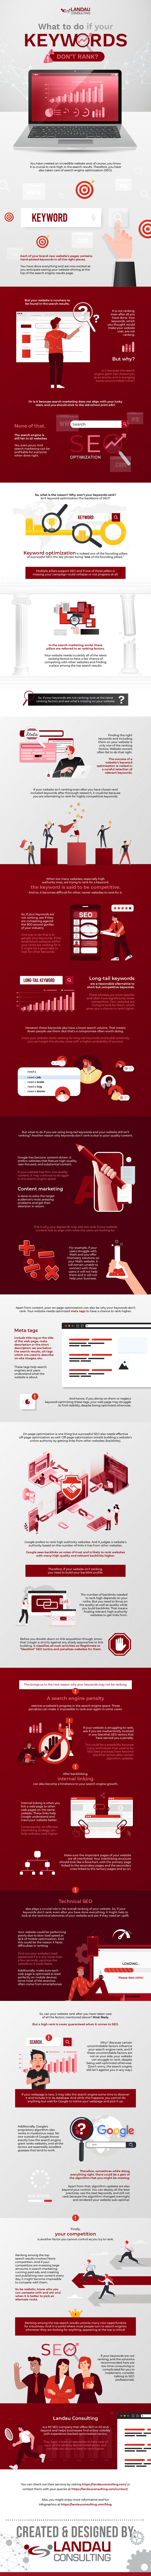 What-to-do-if-your-Keywords-don’t-Rank?-infographic-image